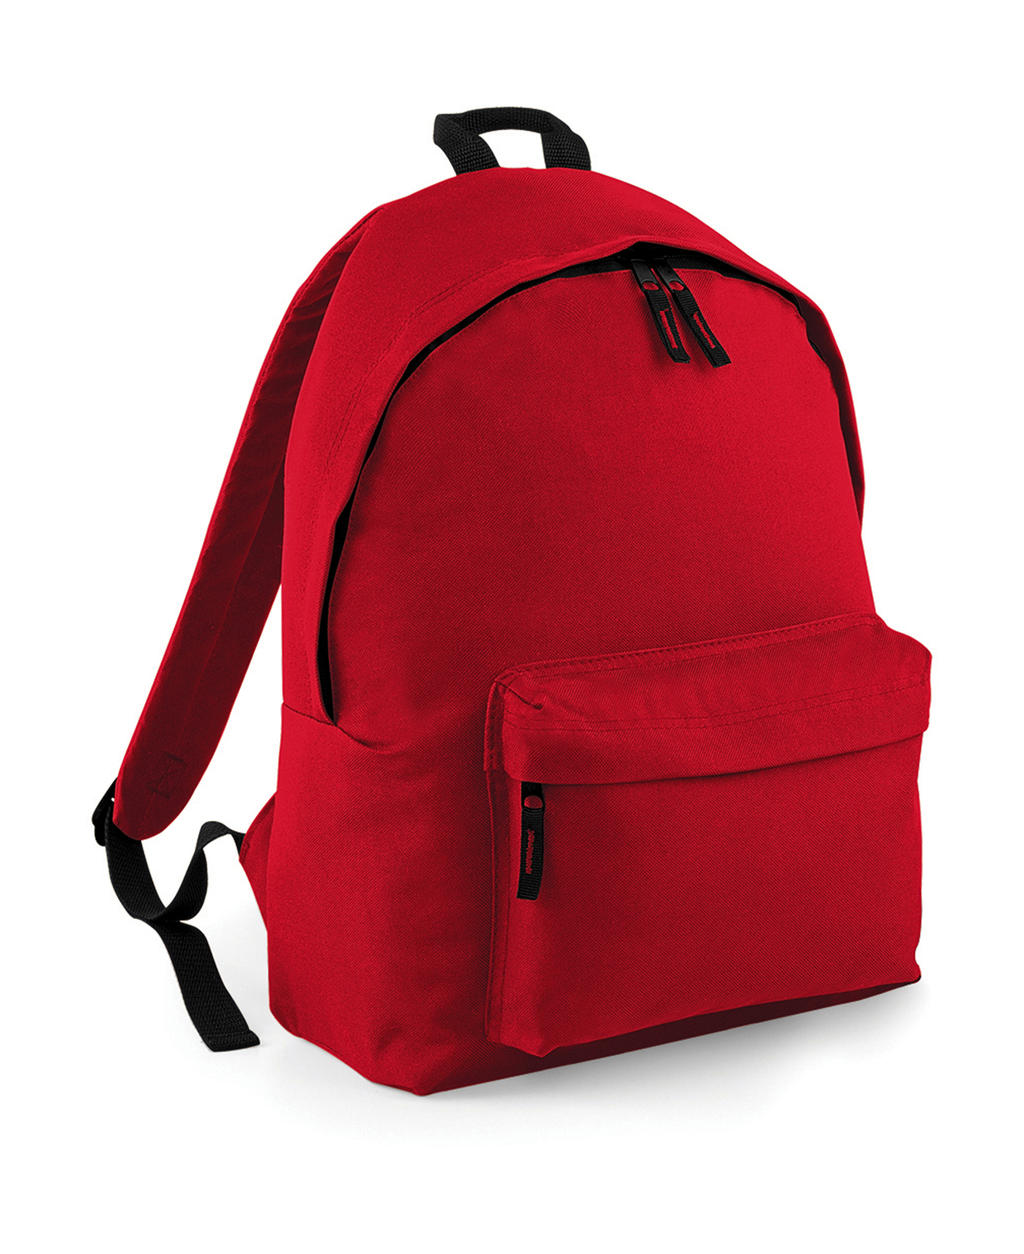  Original Fashion Backpack in Farbe Bright Red